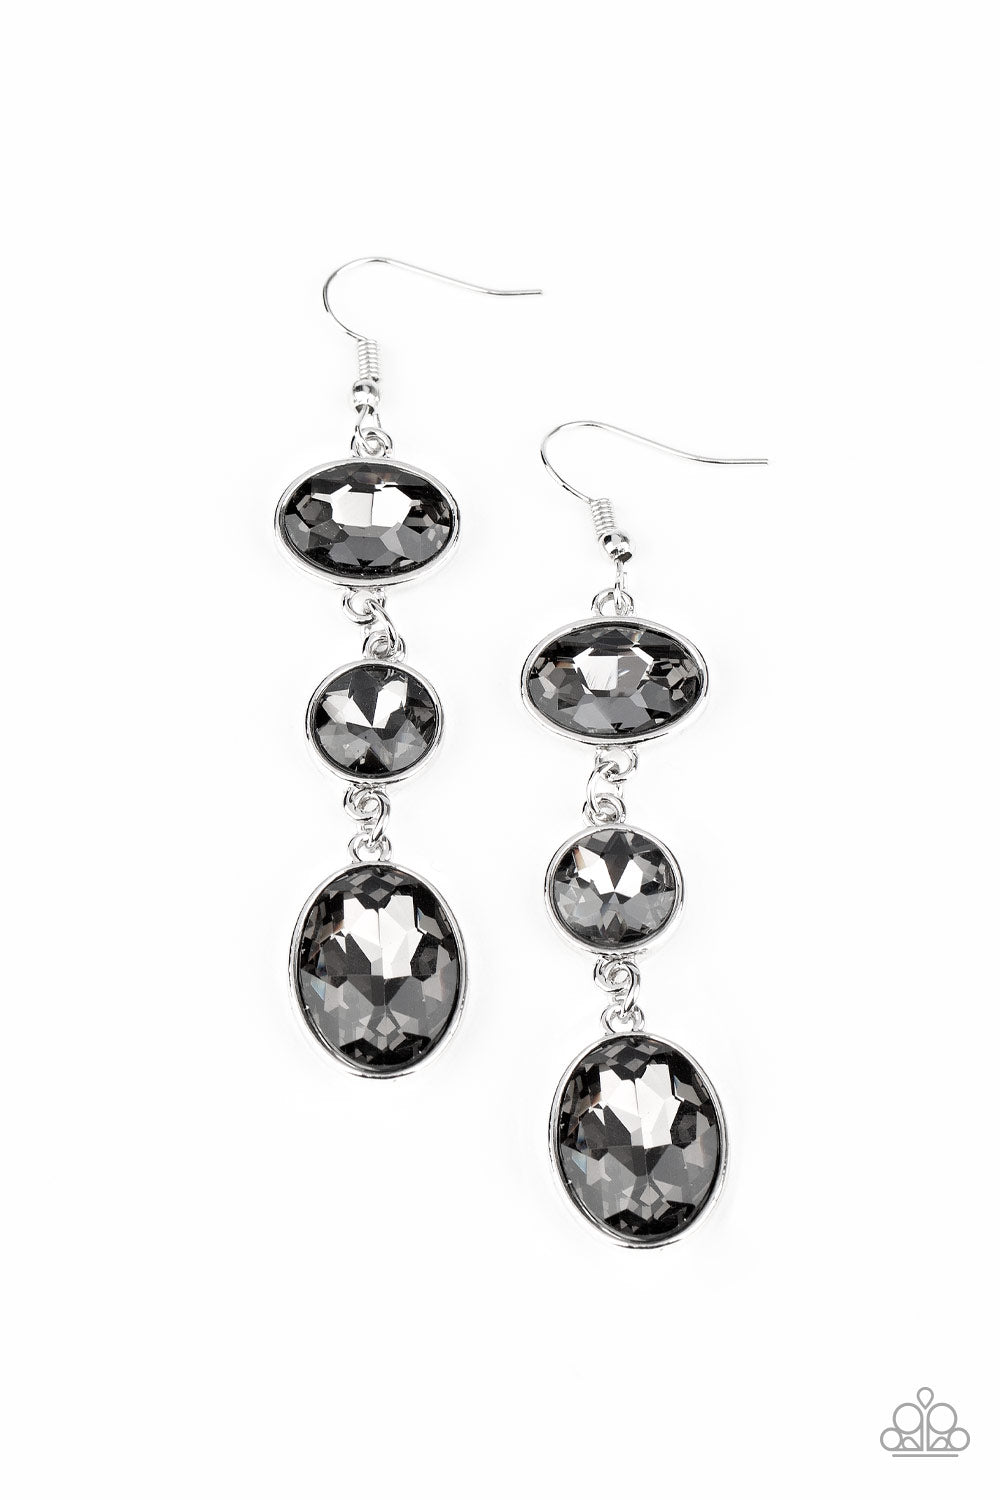 Paparazzi The GLOW Must Go On! - Silver Earrings - A Finishing Touch 